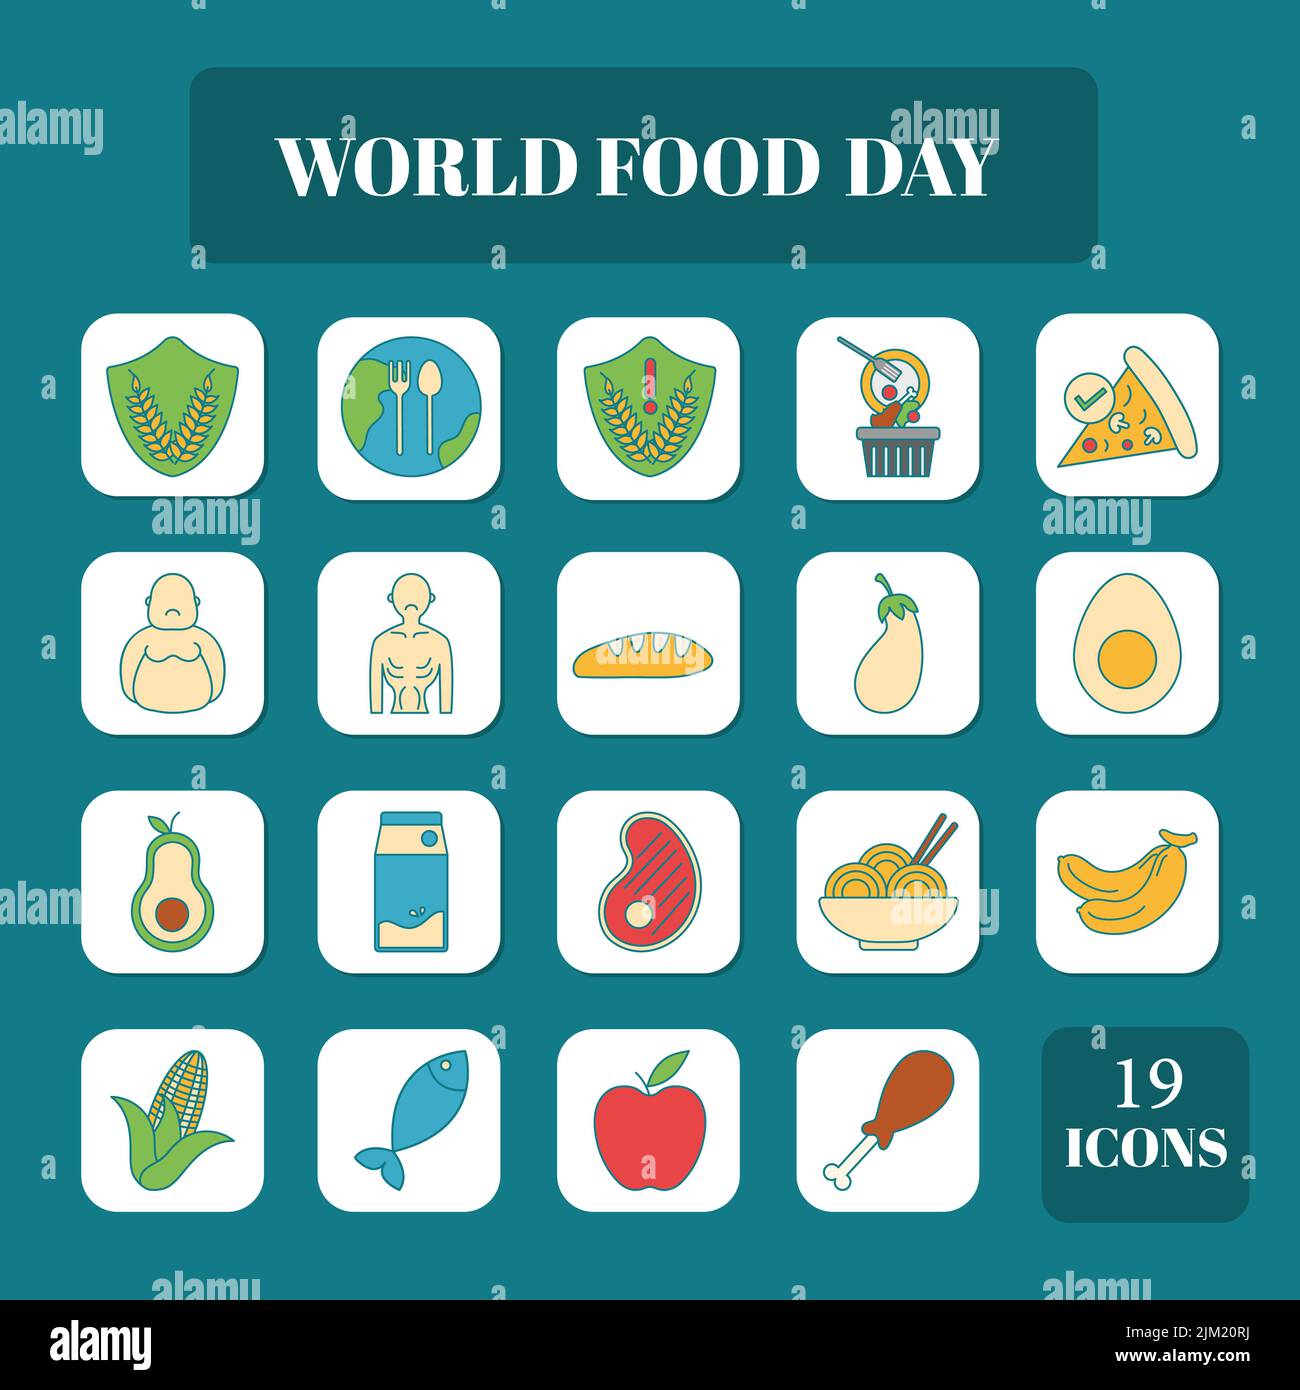 Flat Style World Food Day Square Icon Set On Teal Background.. Stock Vector